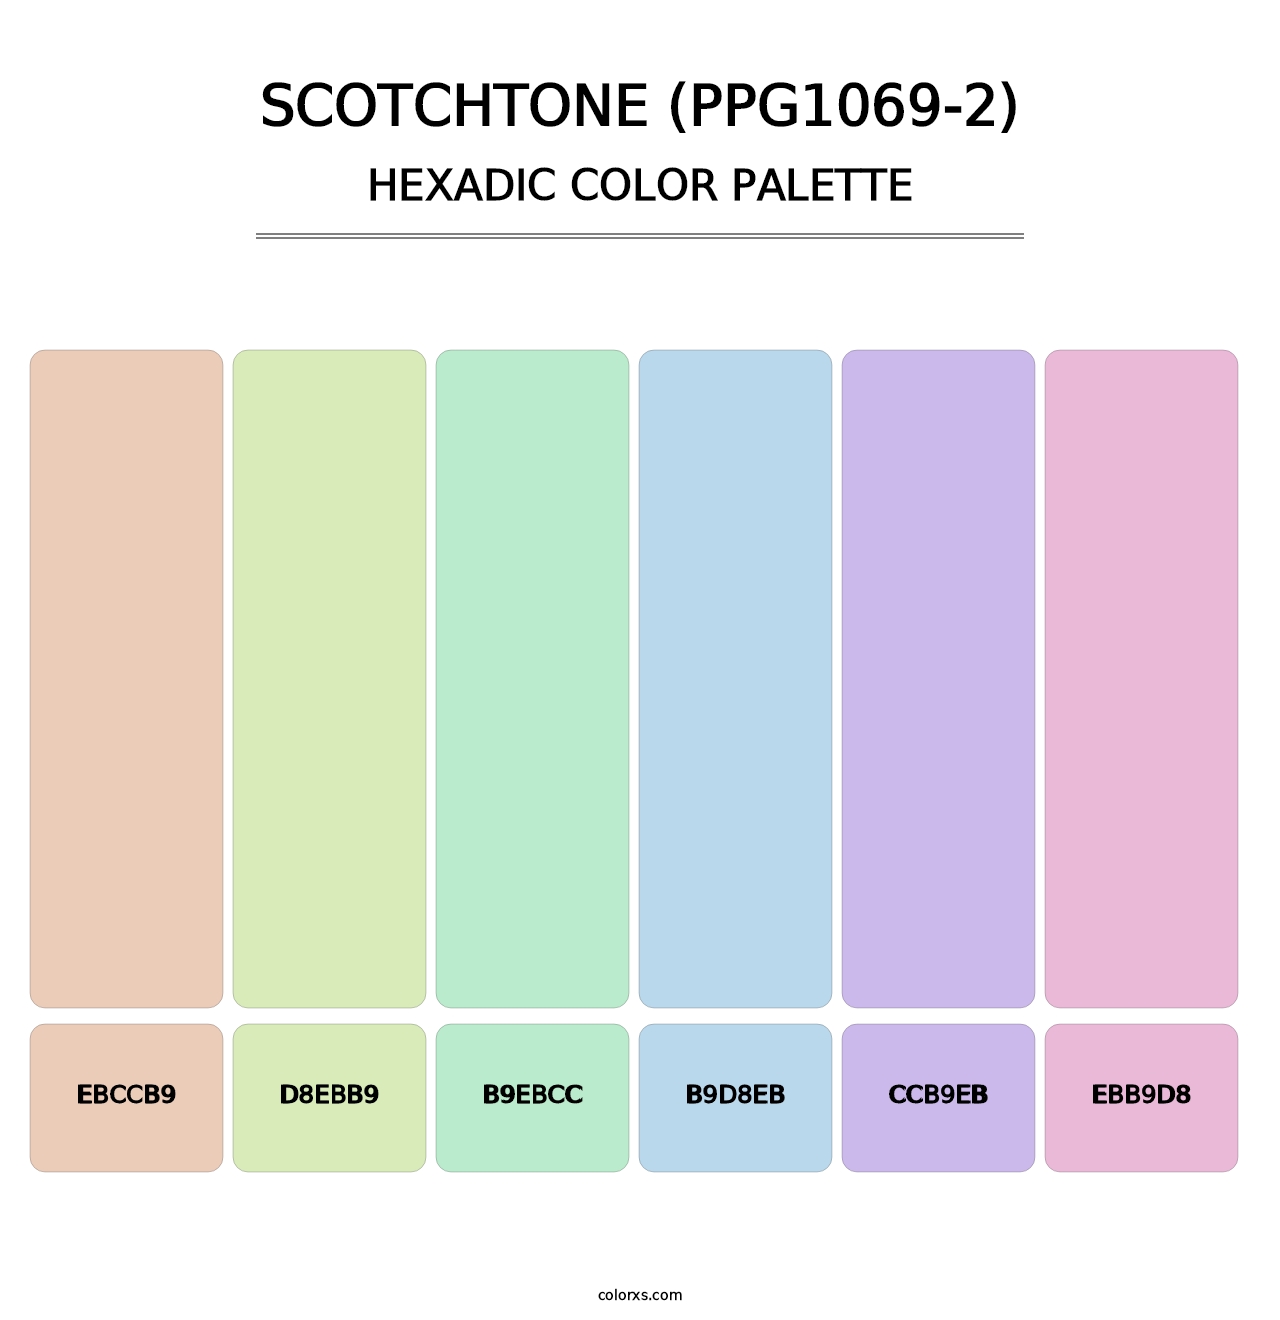 Scotchtone (PPG1069-2) - Hexadic Color Palette